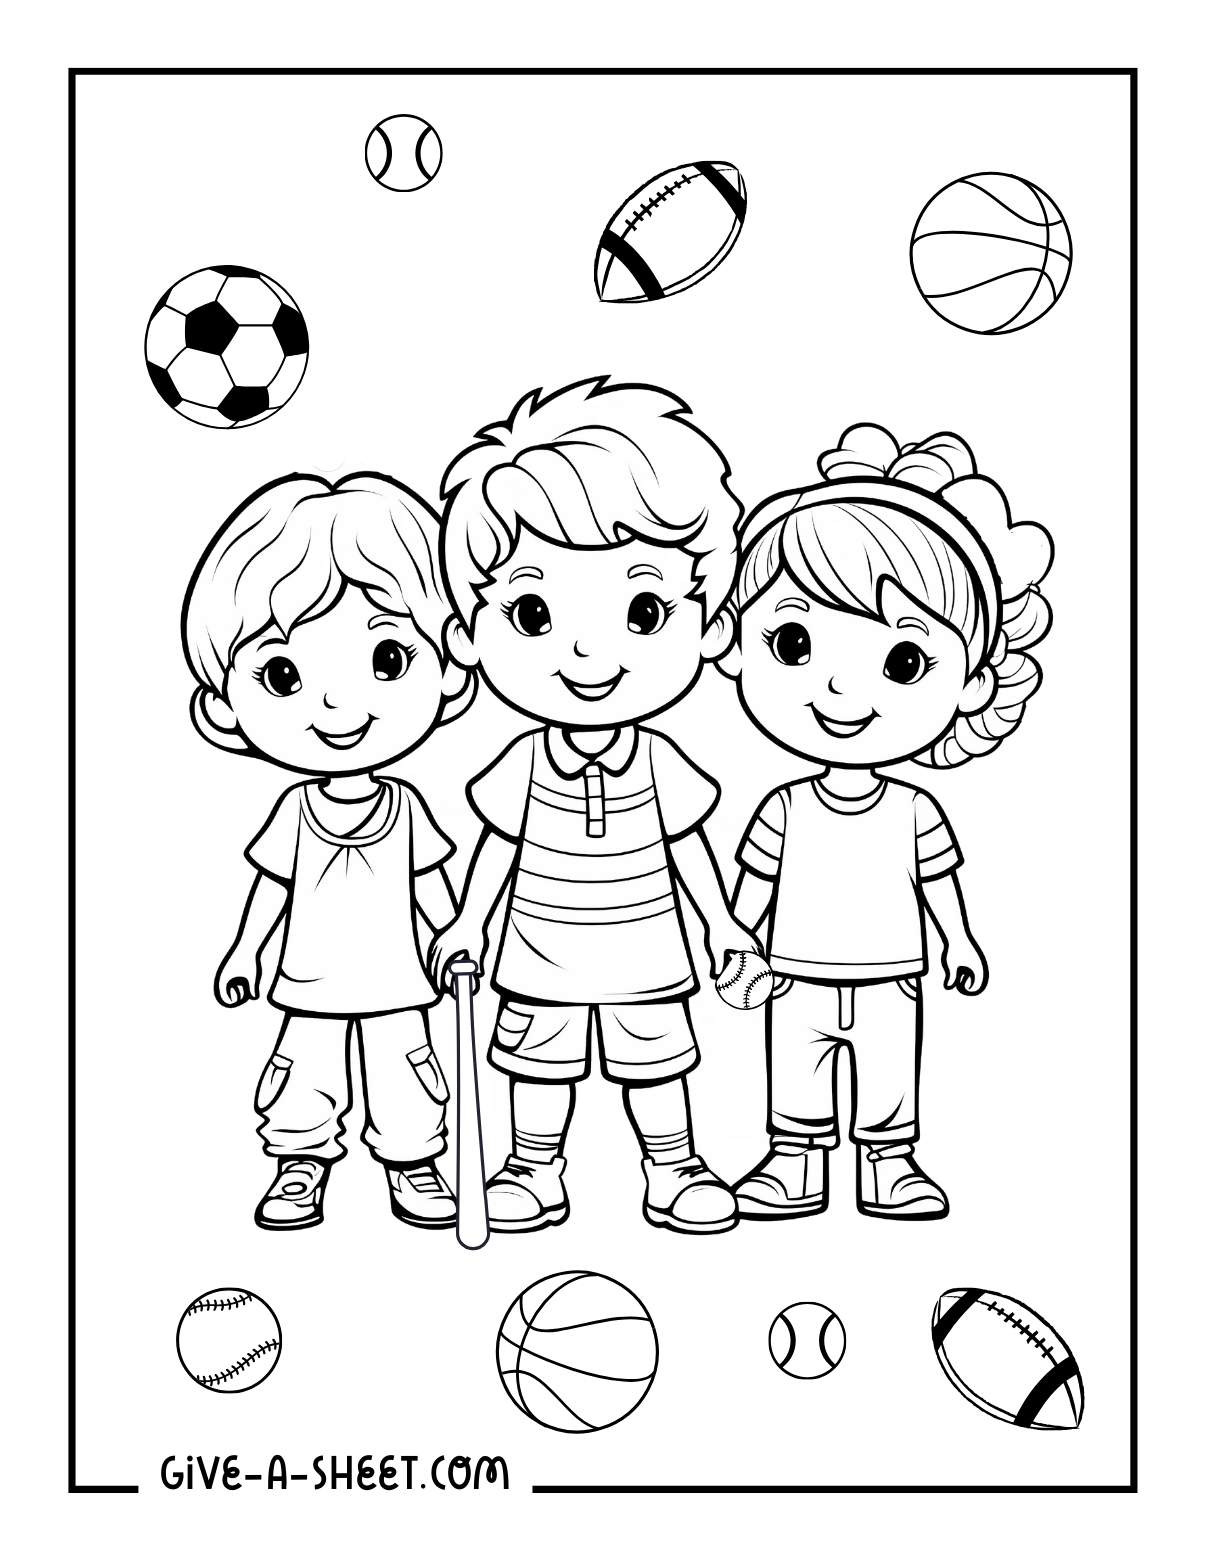 Sports three bff coloring page for kids.